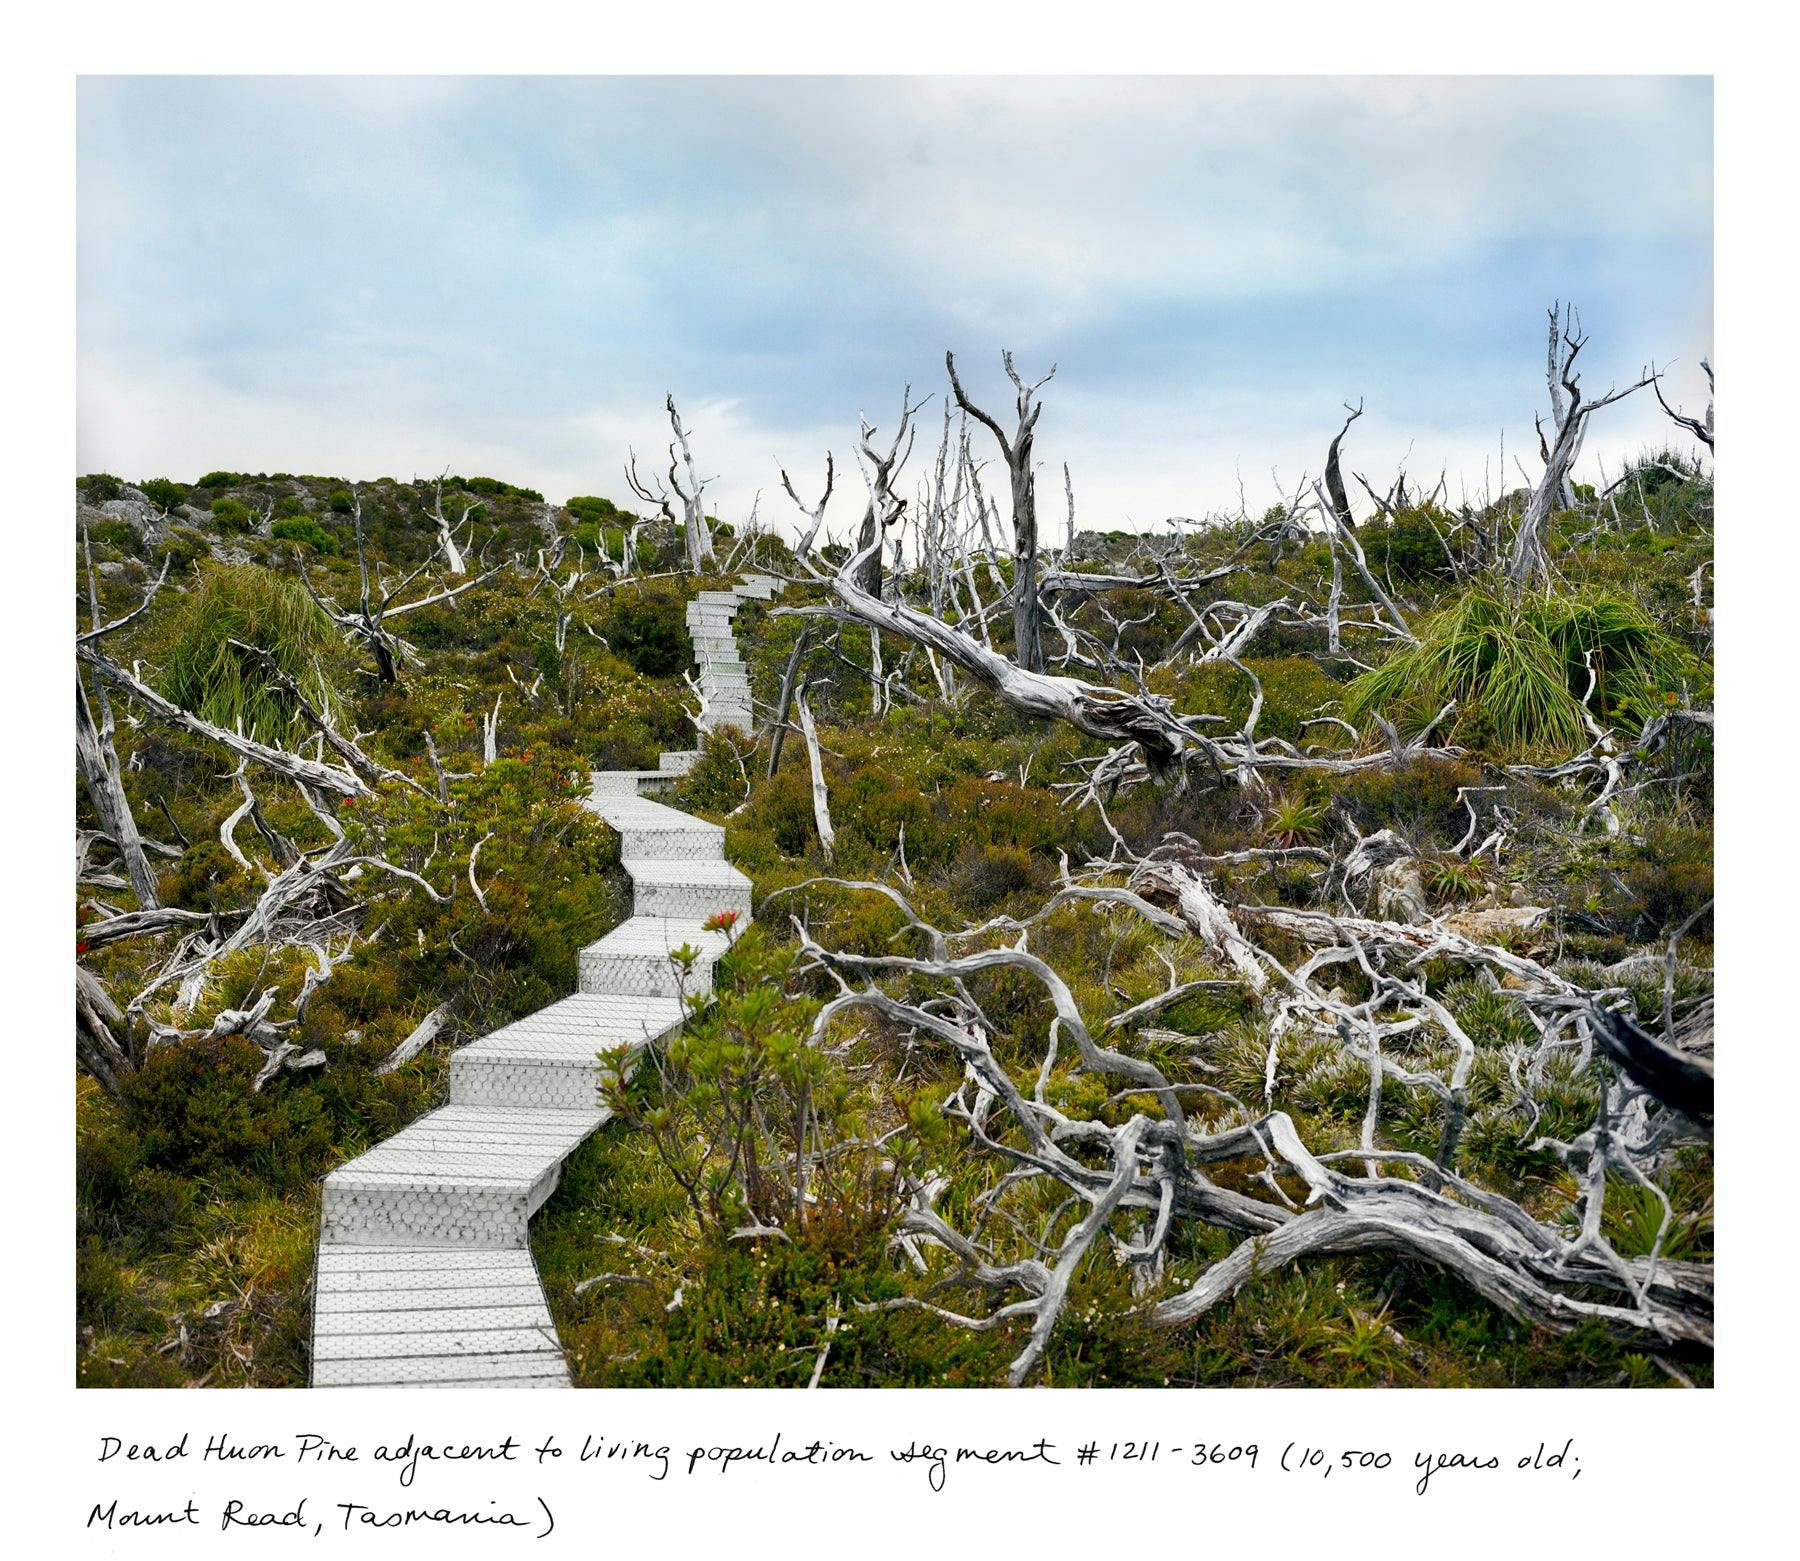 Photography by Rachel Sussman titled "Dead Huon Pine adjacent to living population segment #1211- 3609 (10,500 years o".